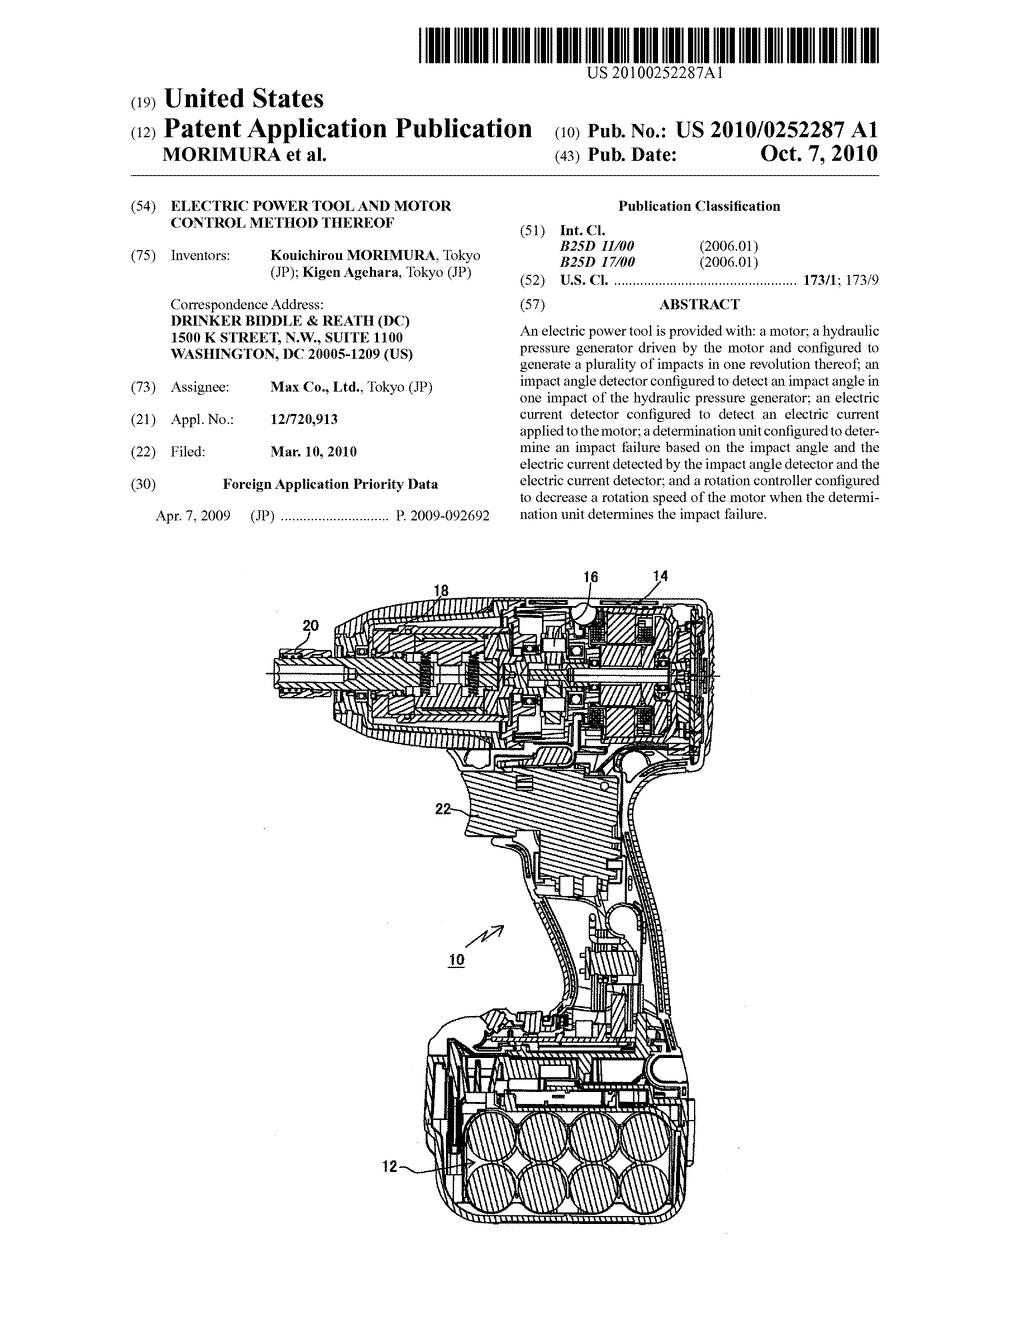 ELECTRIC POWER TOOL AND MOTOR CONTROL METHOD THEREOF - diagram, schematic, and image 01